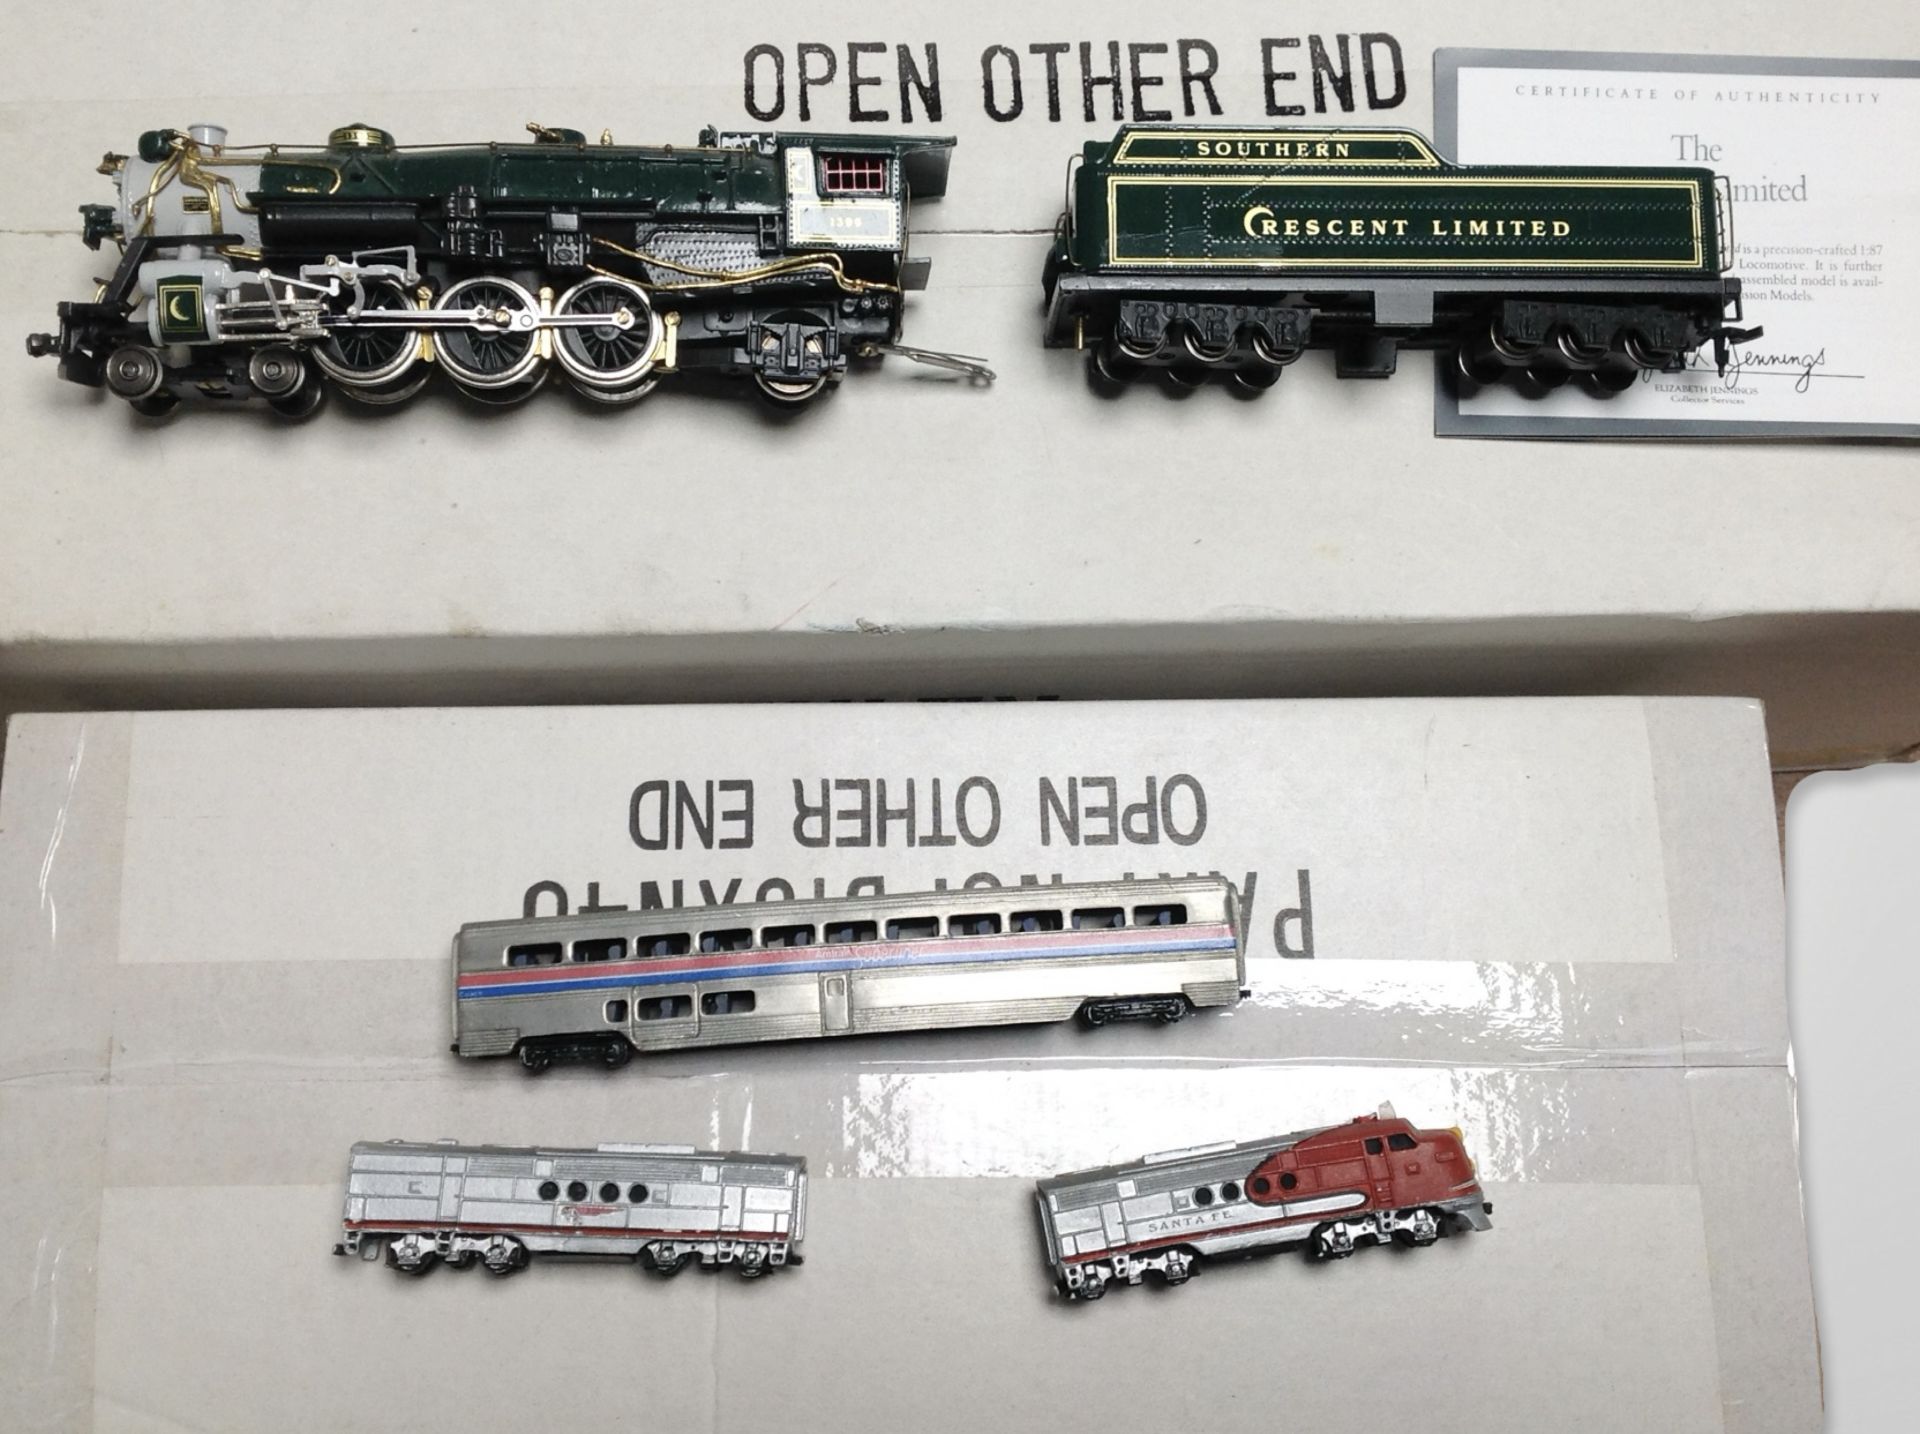 A Franklin Mint Precision Models The Crescent Limited 1:87 scale Southern Crescent locomotive,